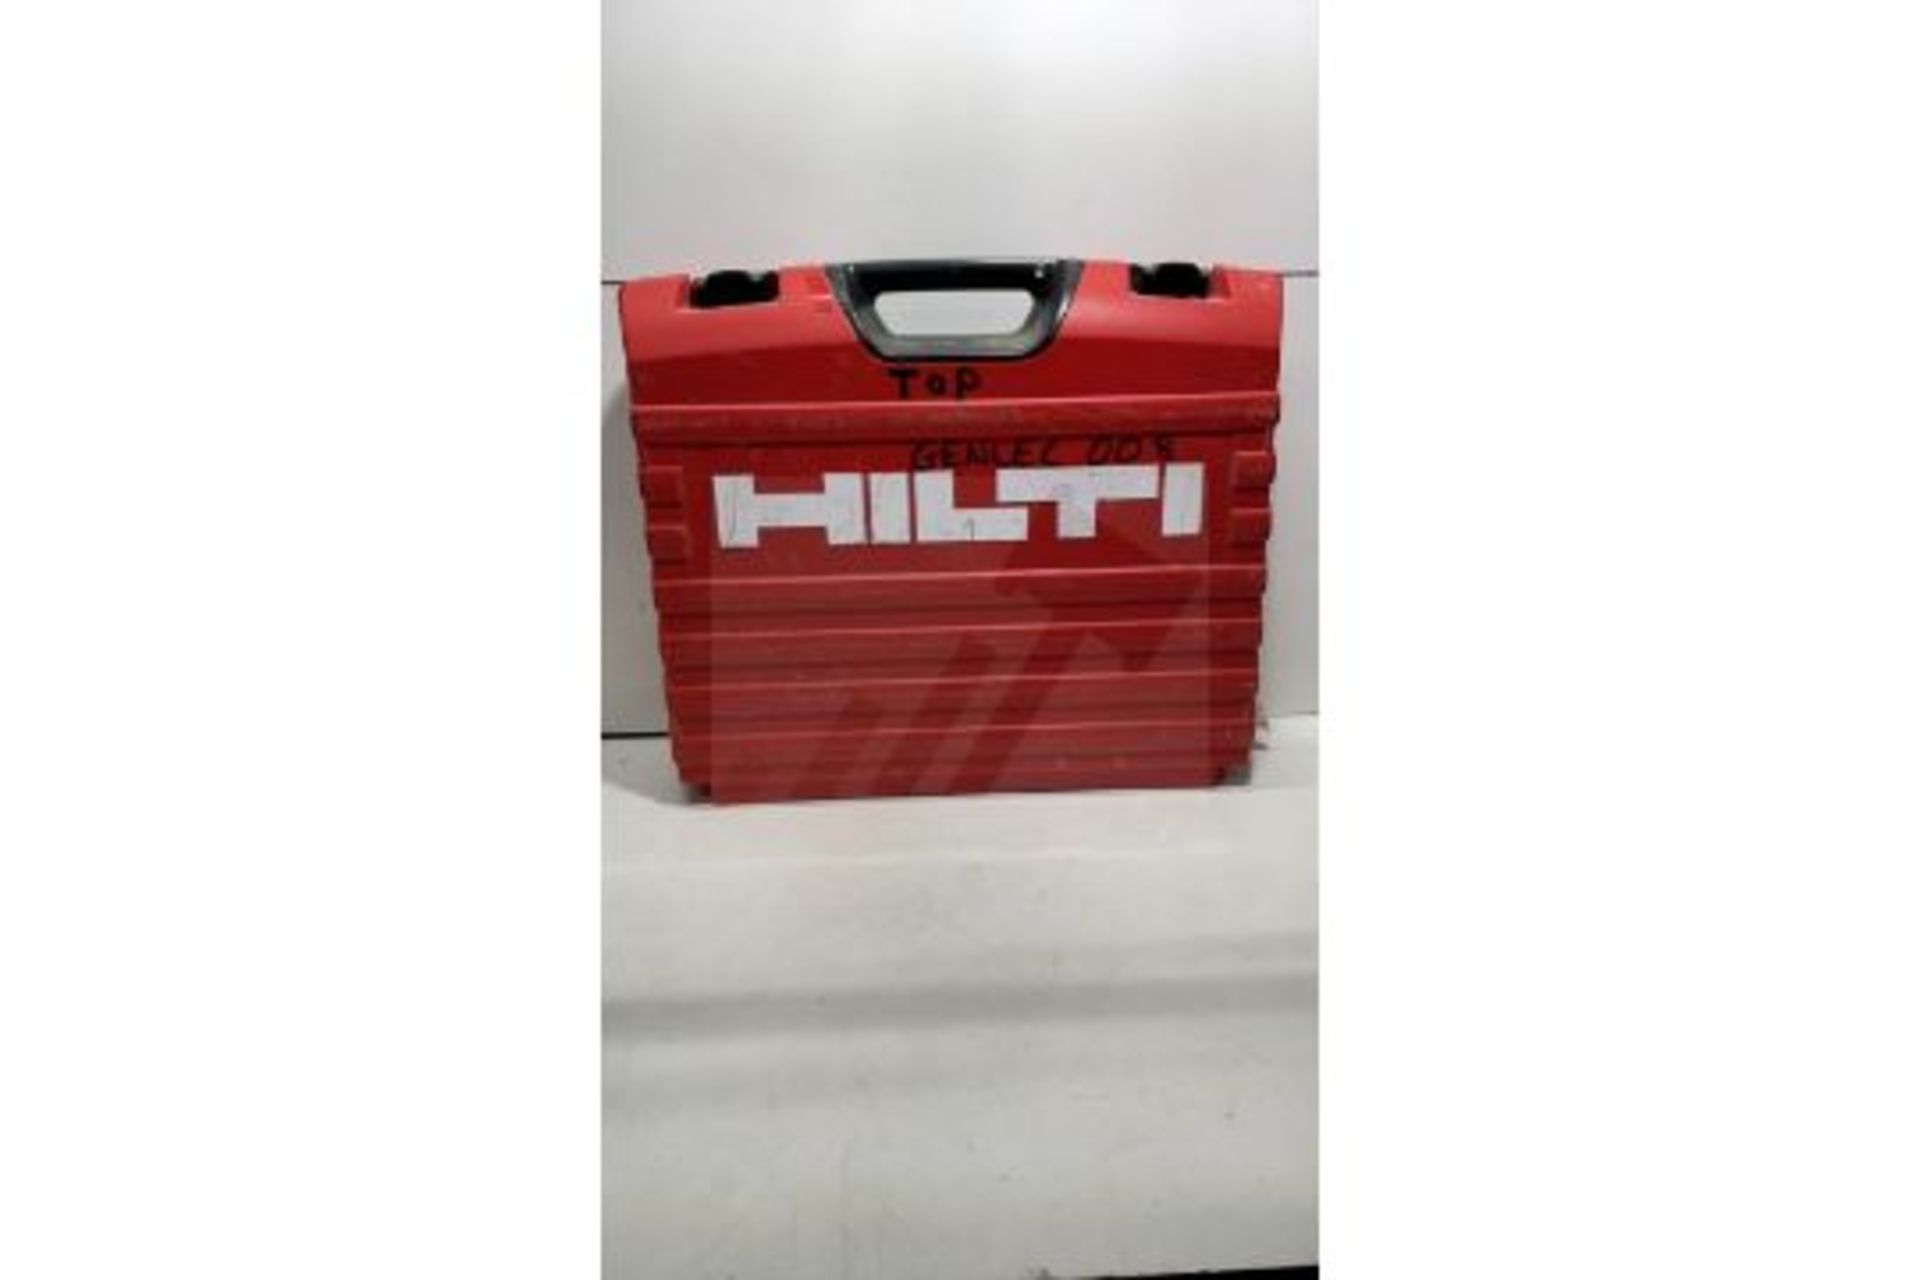 Hilti GX 120-ME Fully Automatic Gas-Actuated Fastening Tool - Image 5 of 5